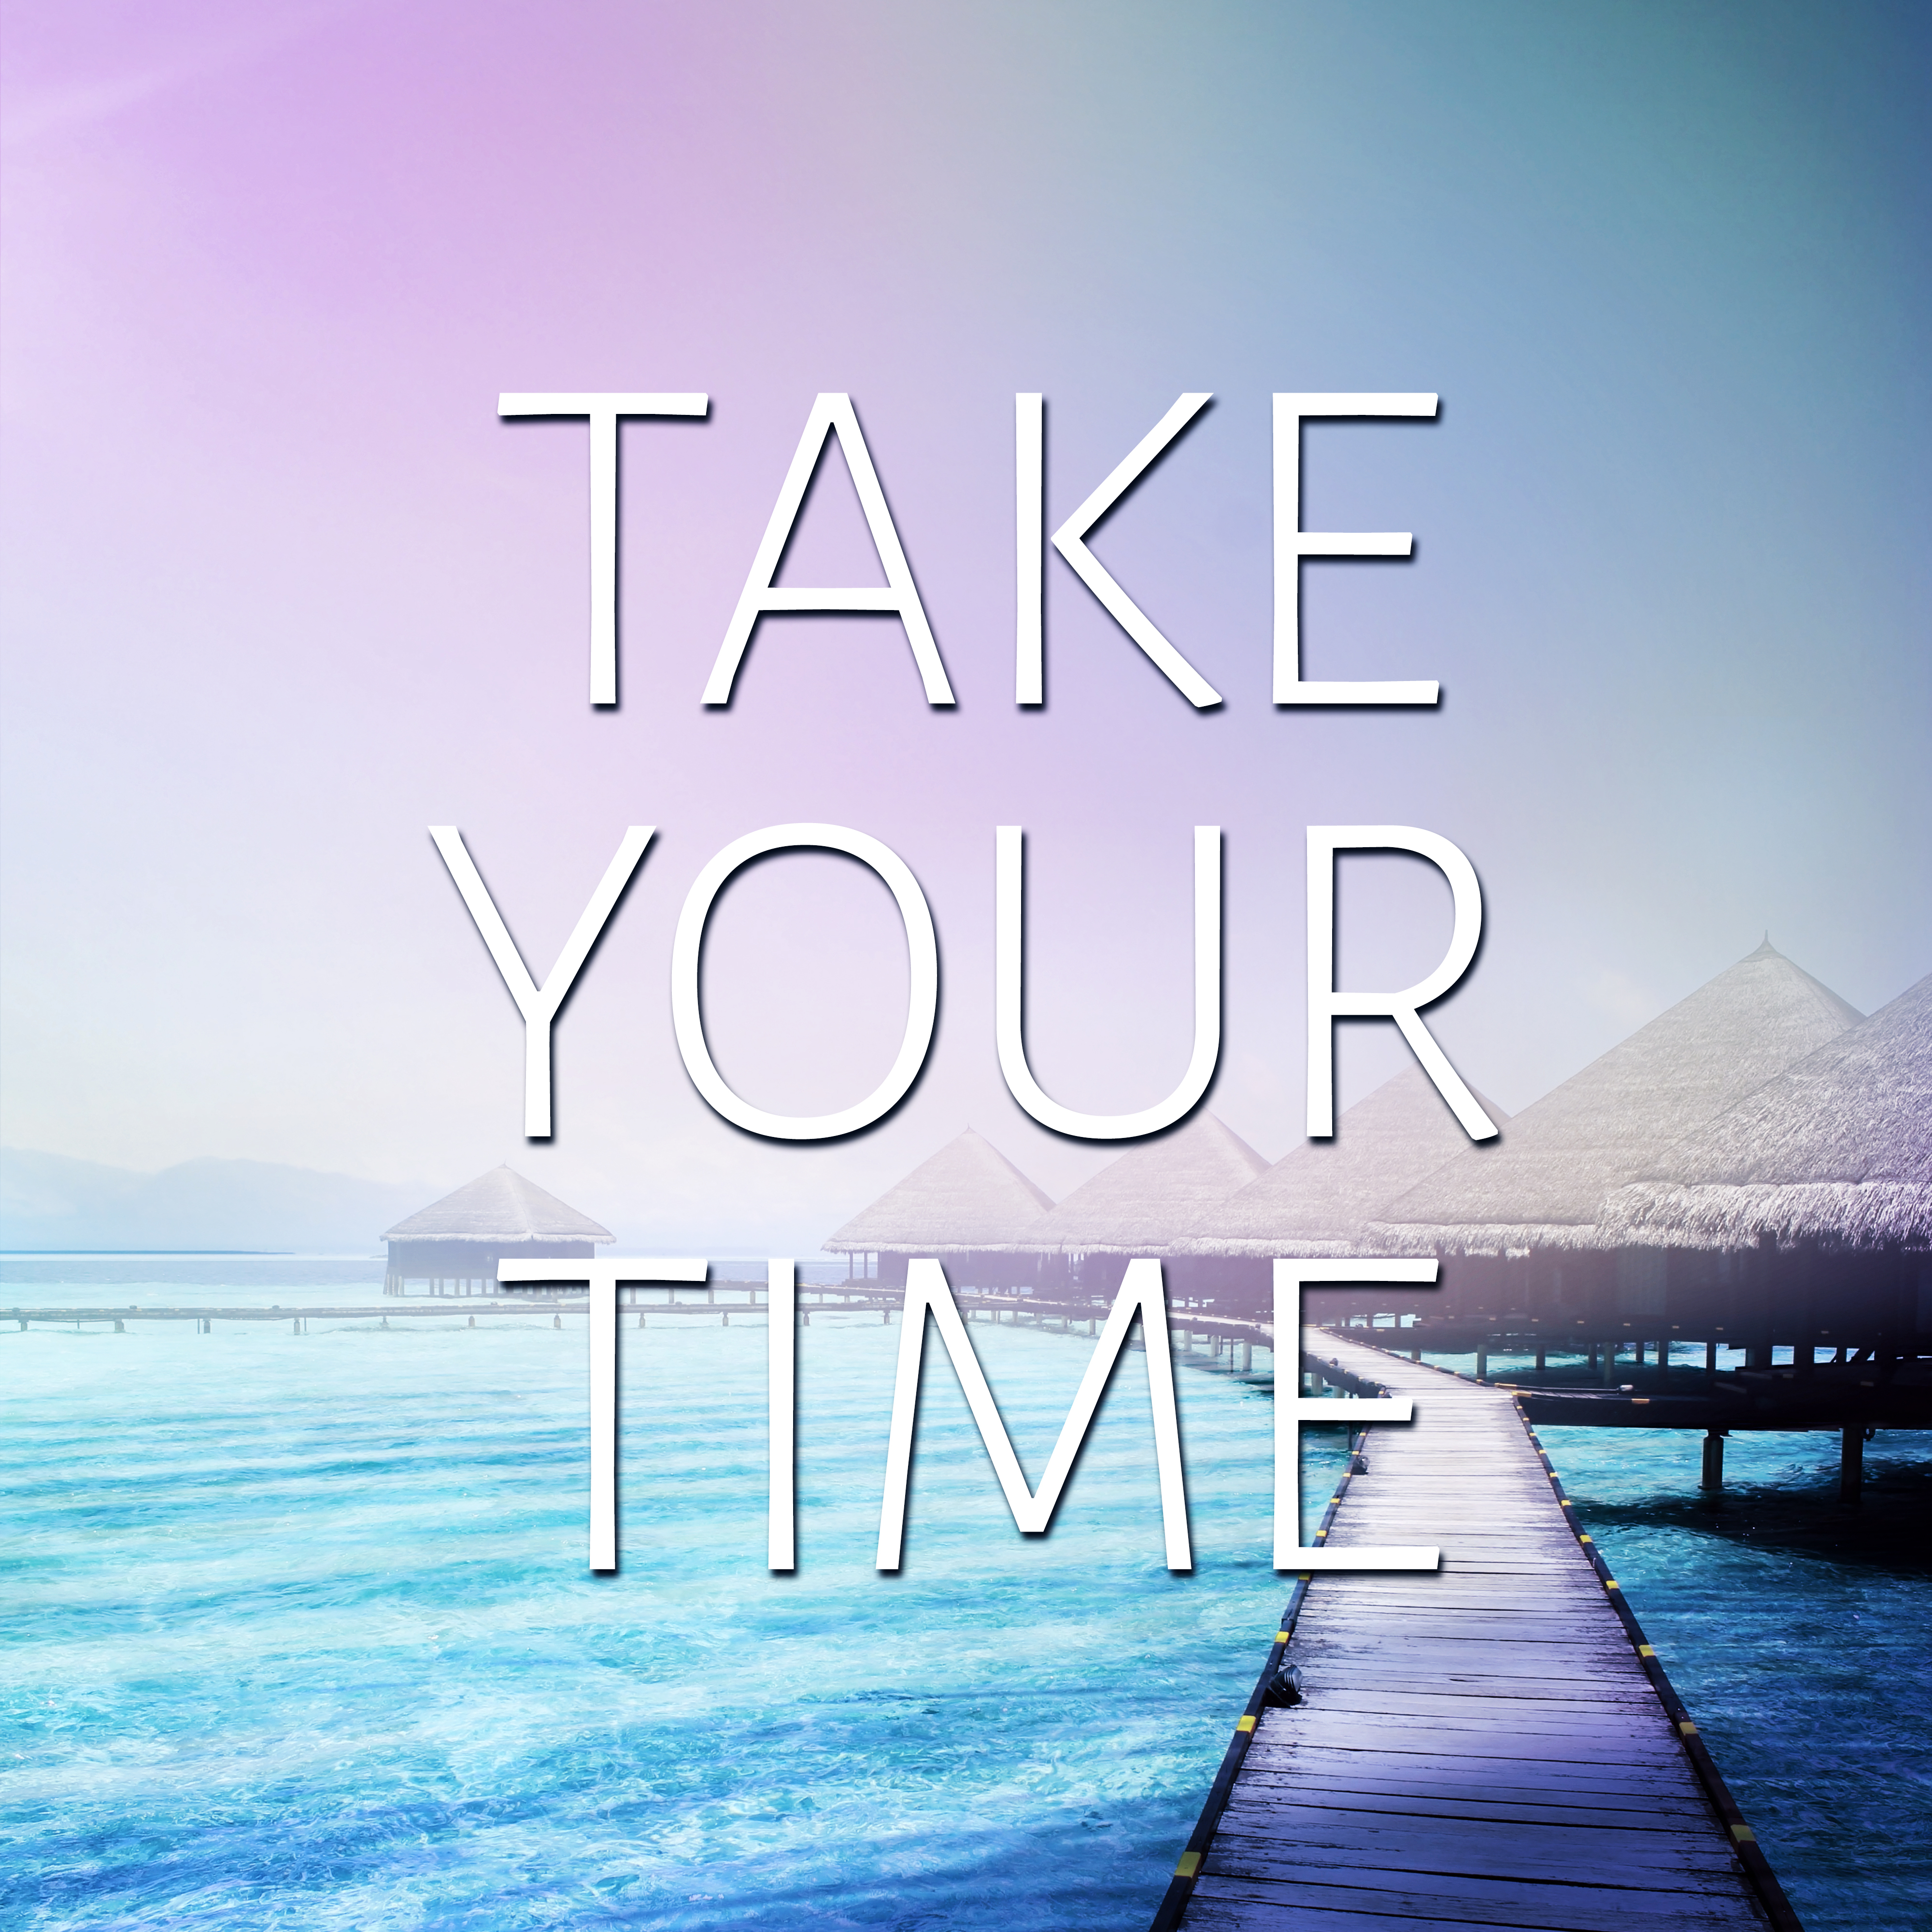 Relaxation time. Take your time. Relaxation time картинки. Time to Relax Wallpaper. Time to Relax Бахрейн.